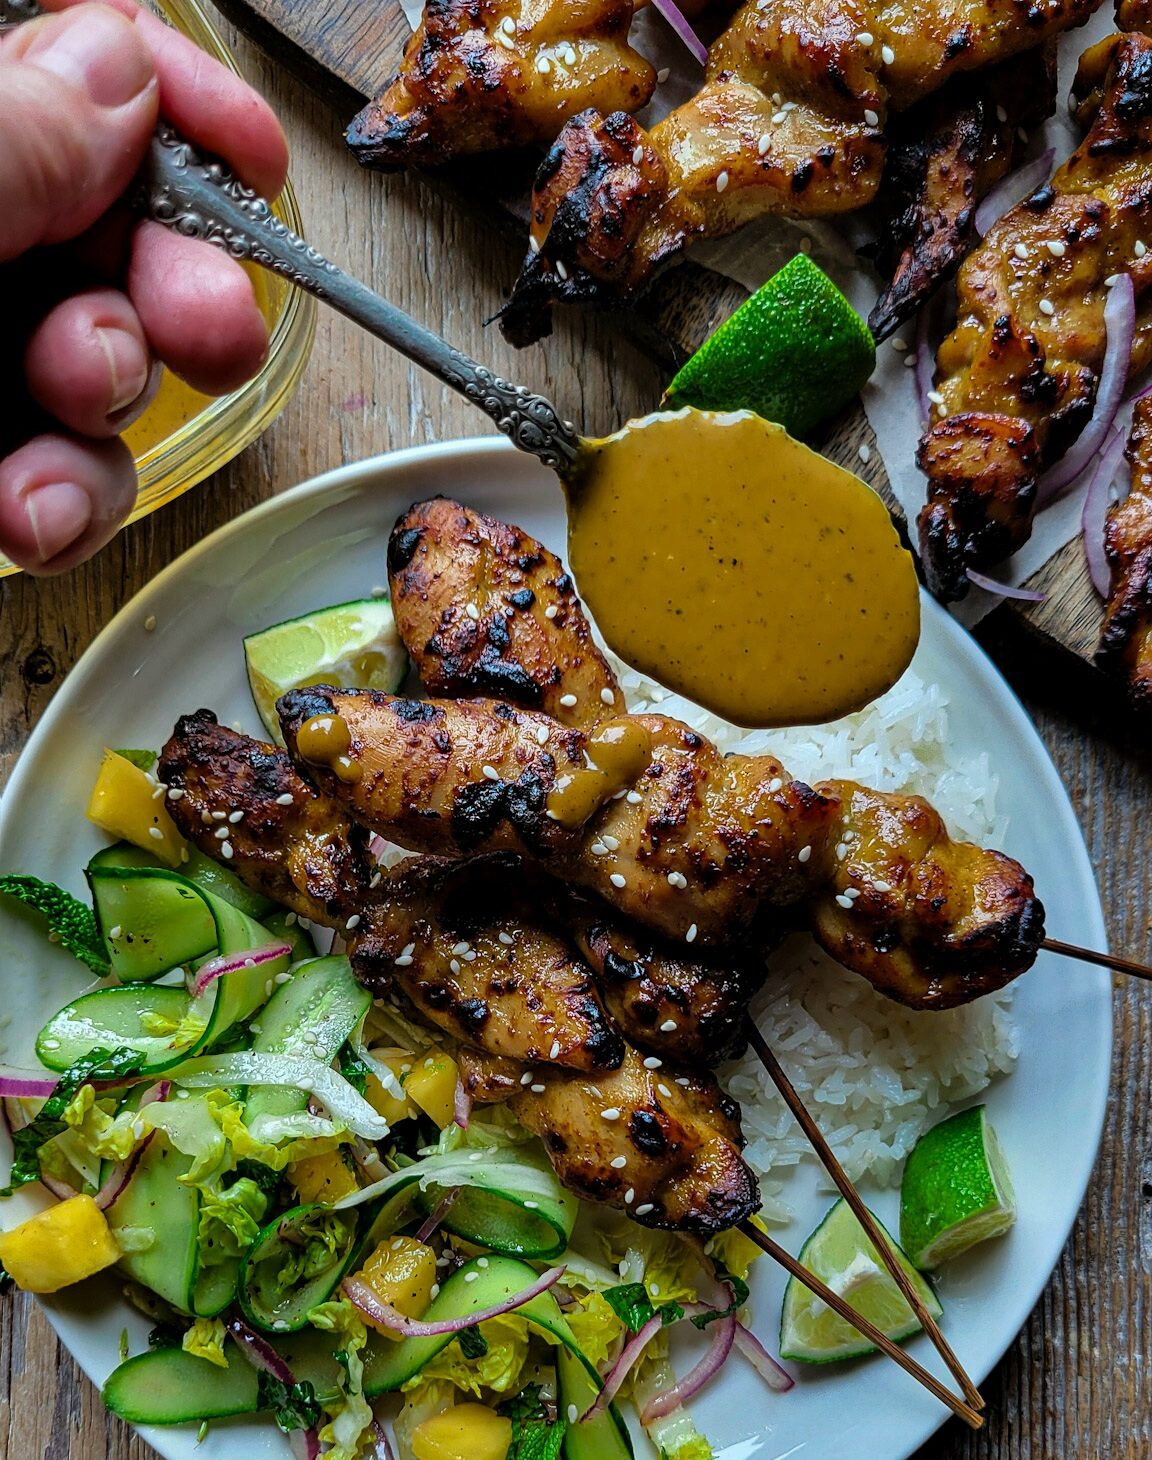 A spoon holding spicy Peanut sauce is being drizzled over Chicken Satay skewers on a plate with rice and tropical salad.